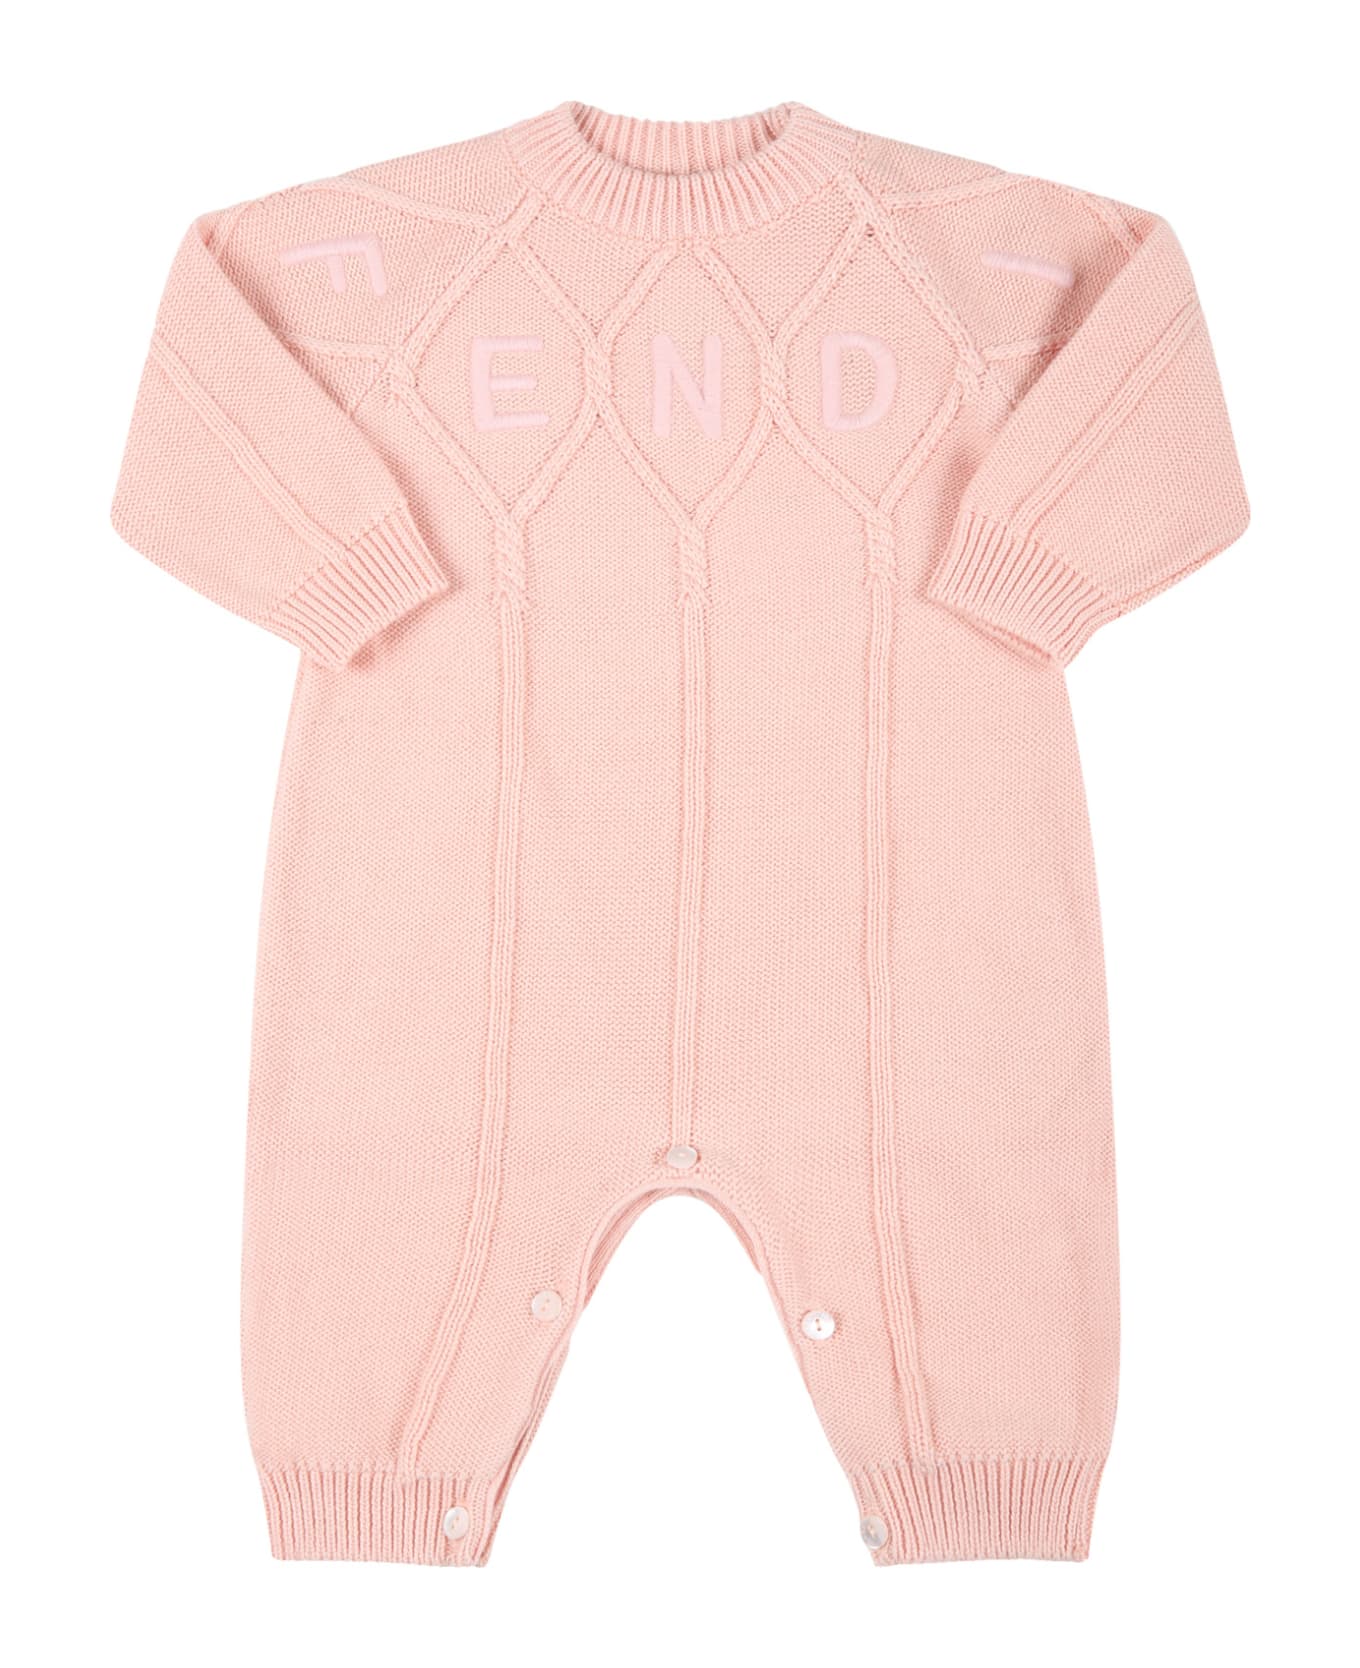 Fendi Pink Babygrow For Baby Girl With Logo - Pink